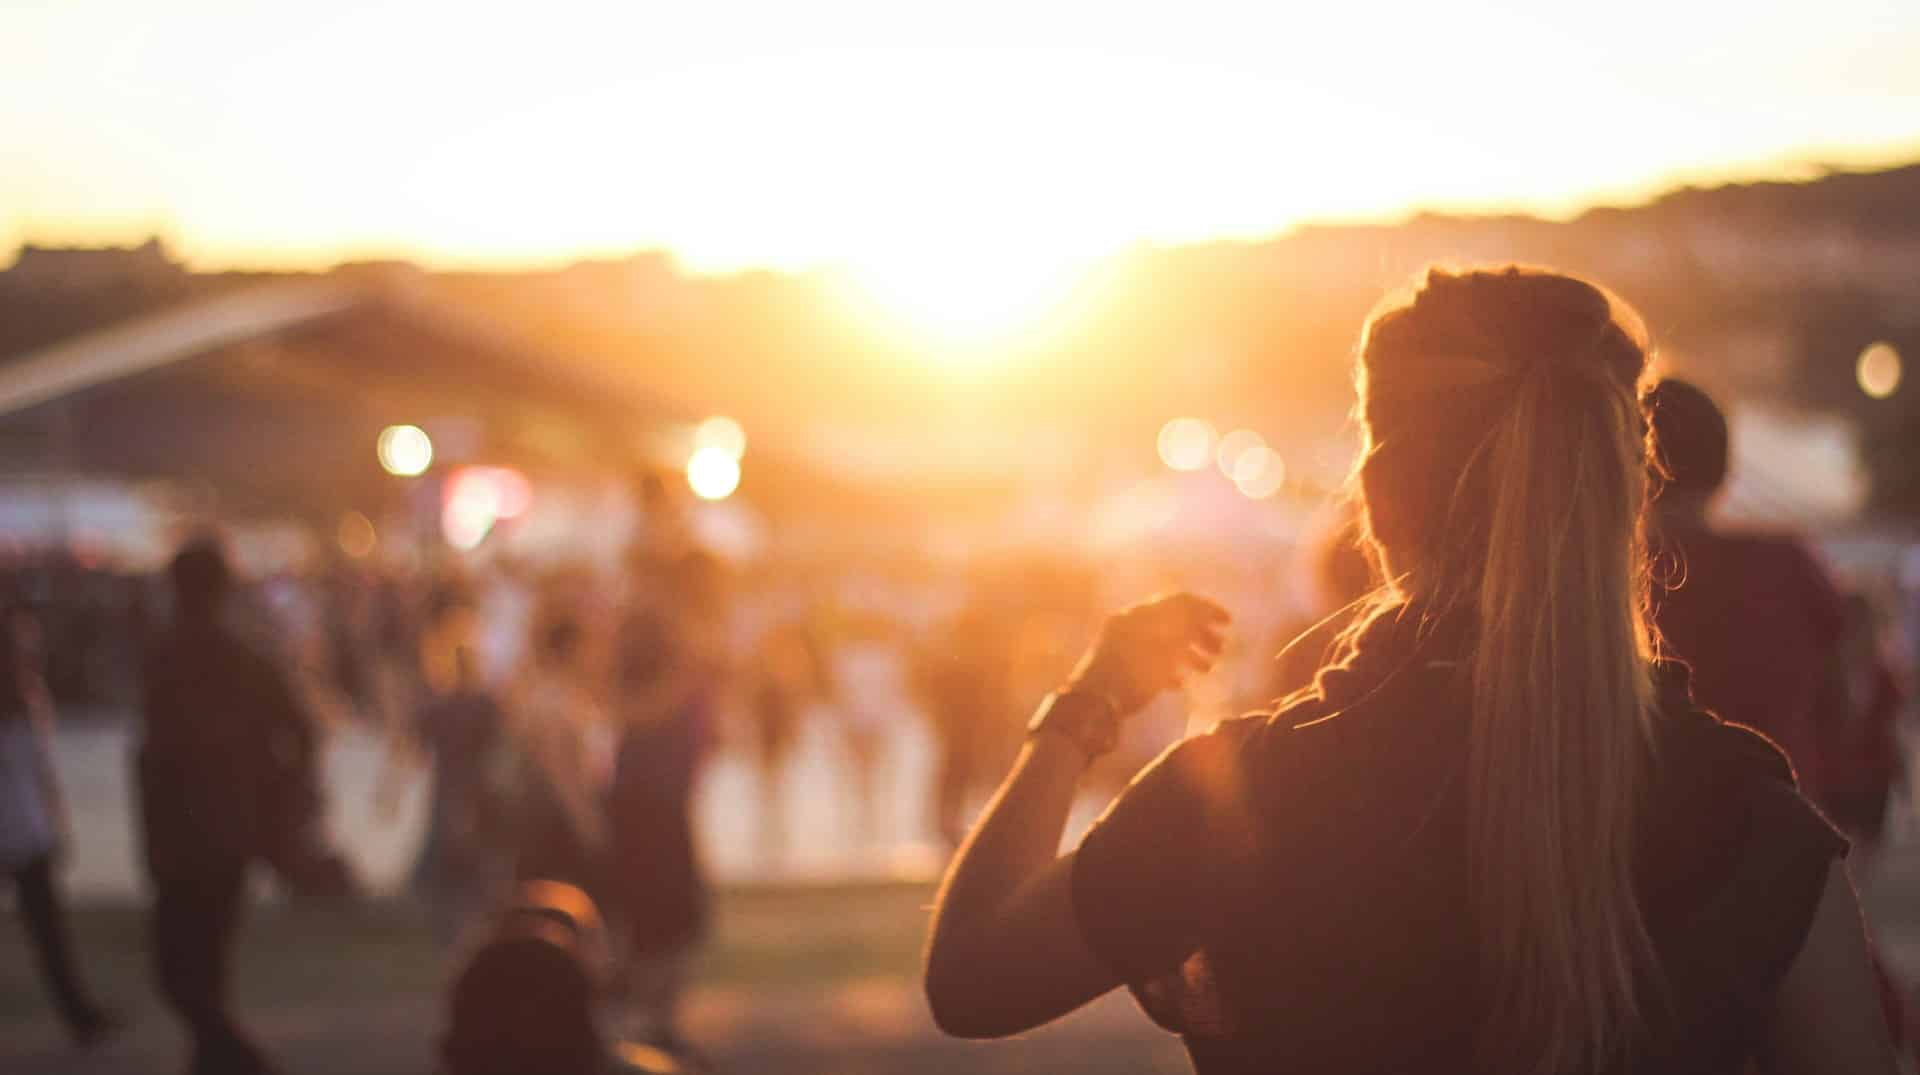 silhouette of woman at sunset at an outdoor concert event